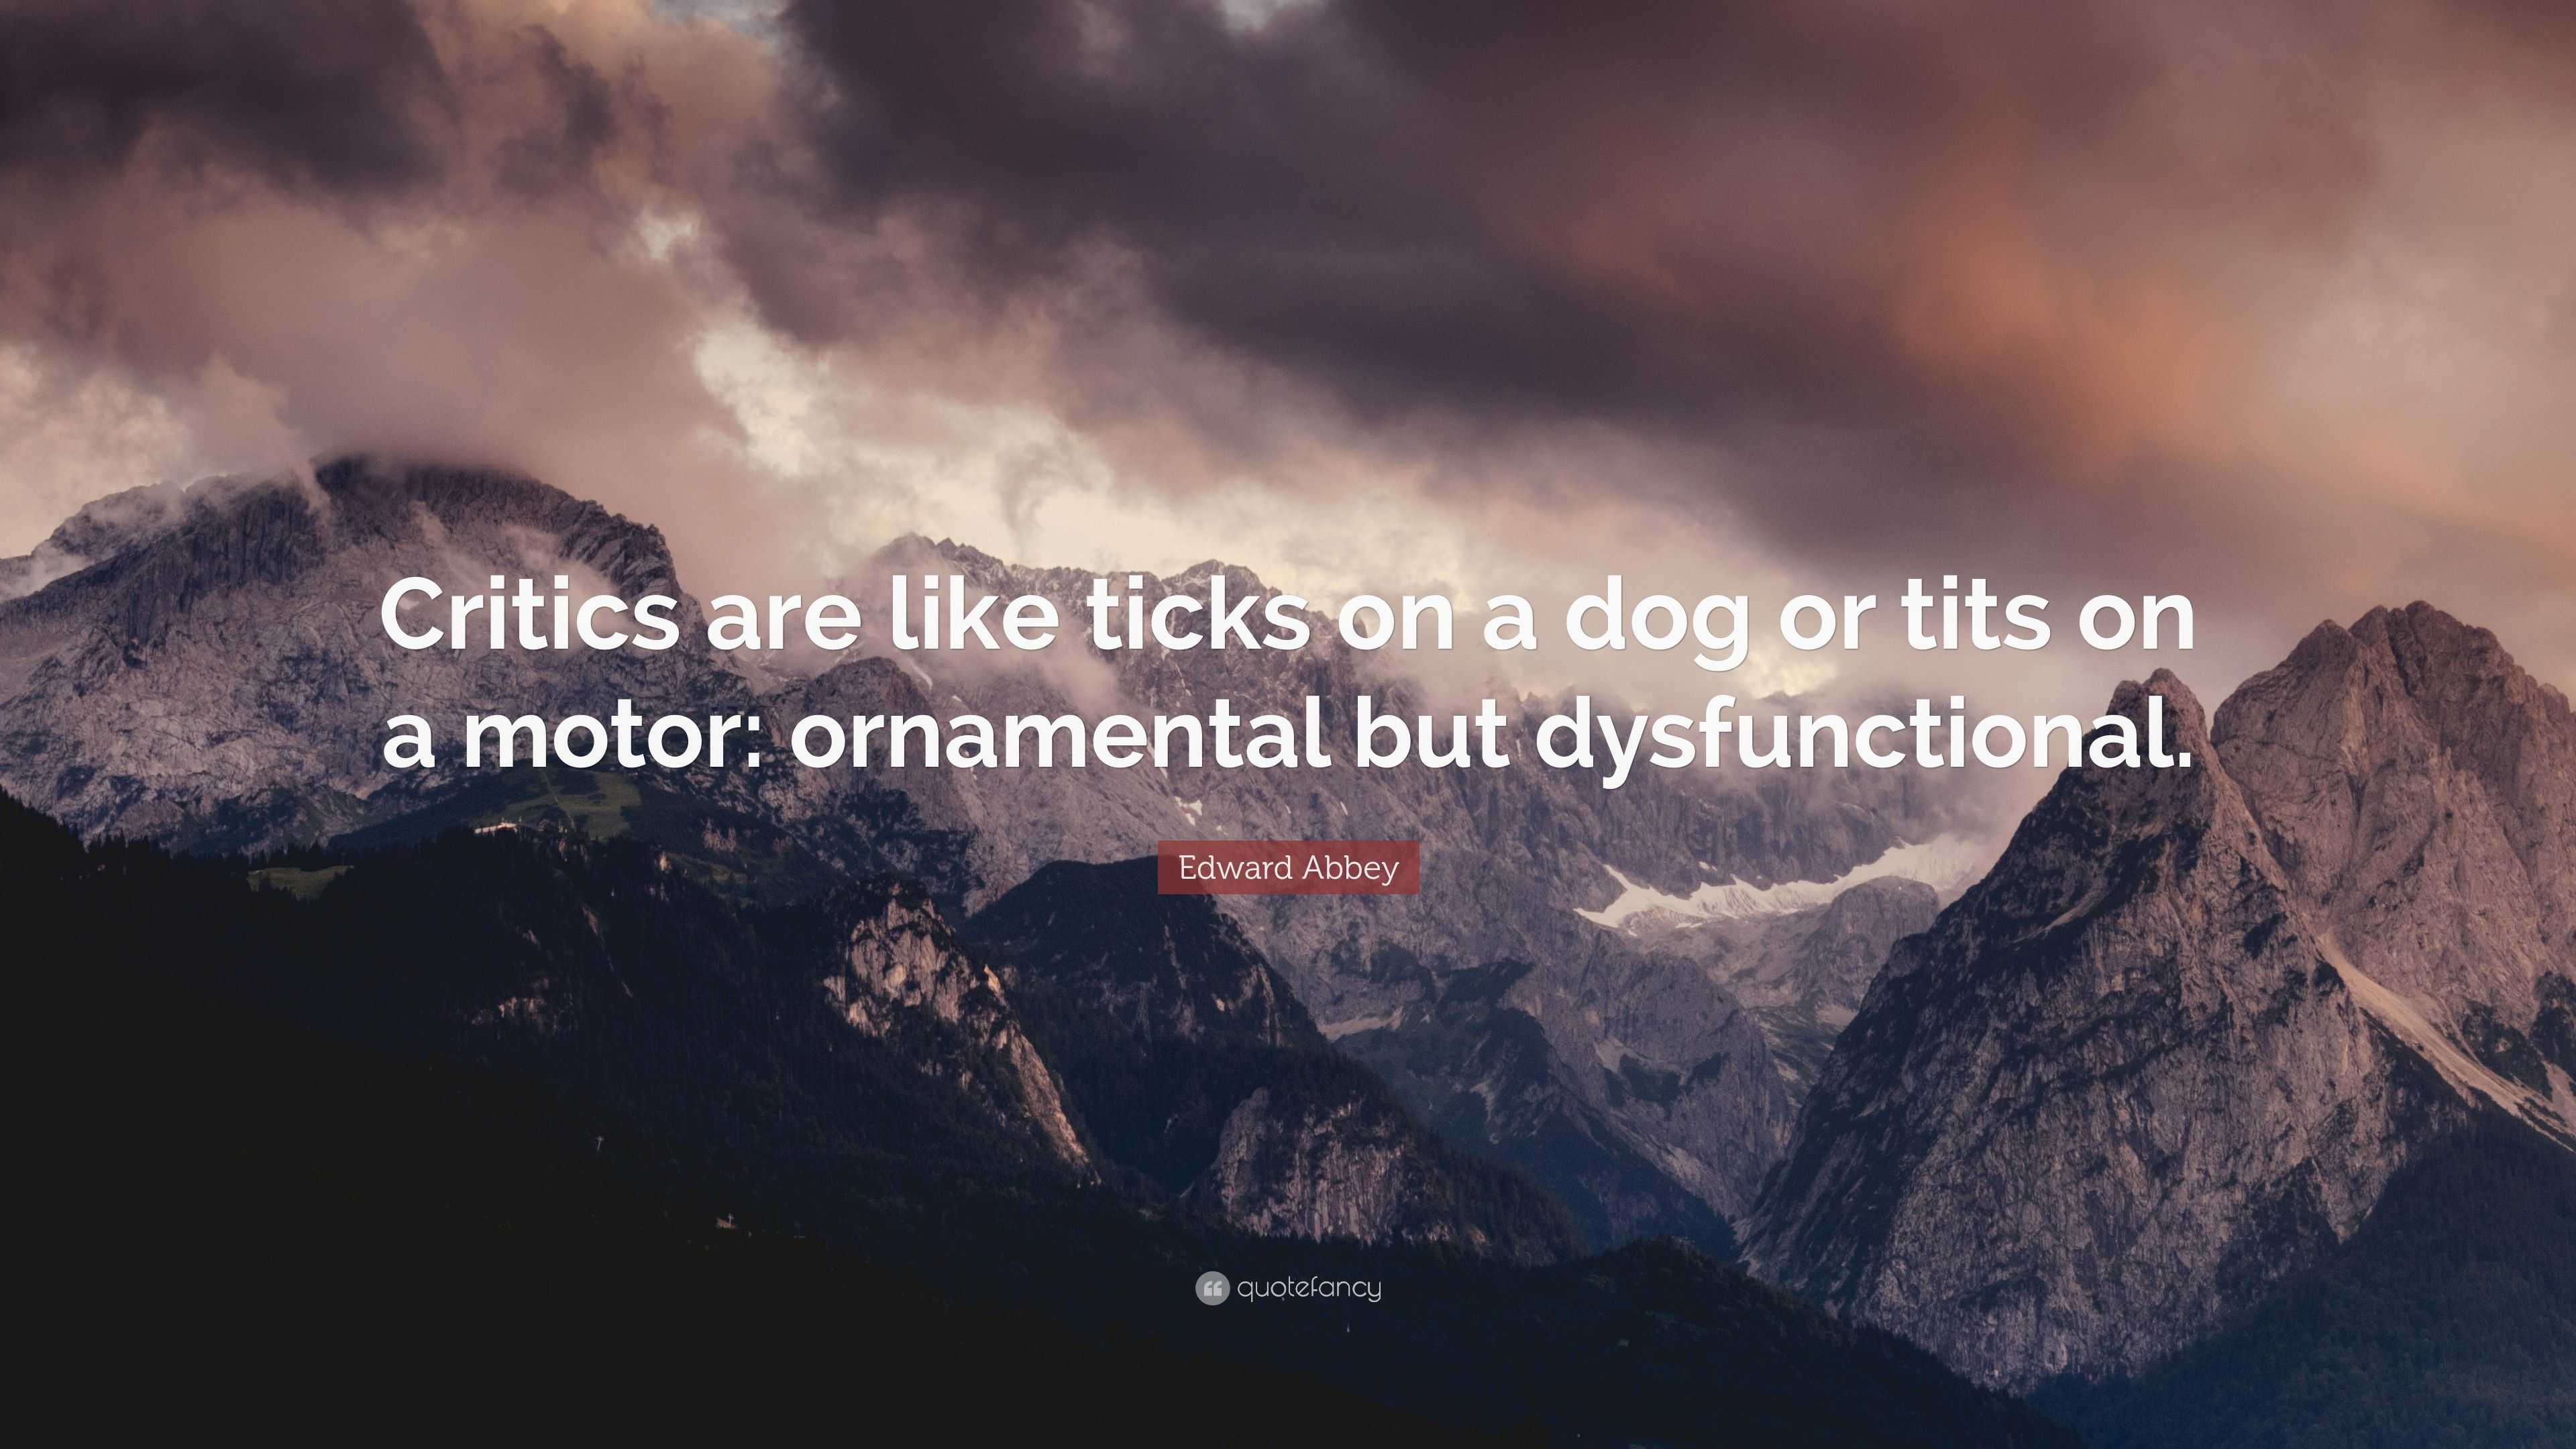 Edward Abbey Quote: “Critics are like ticks on a dog or tits on a